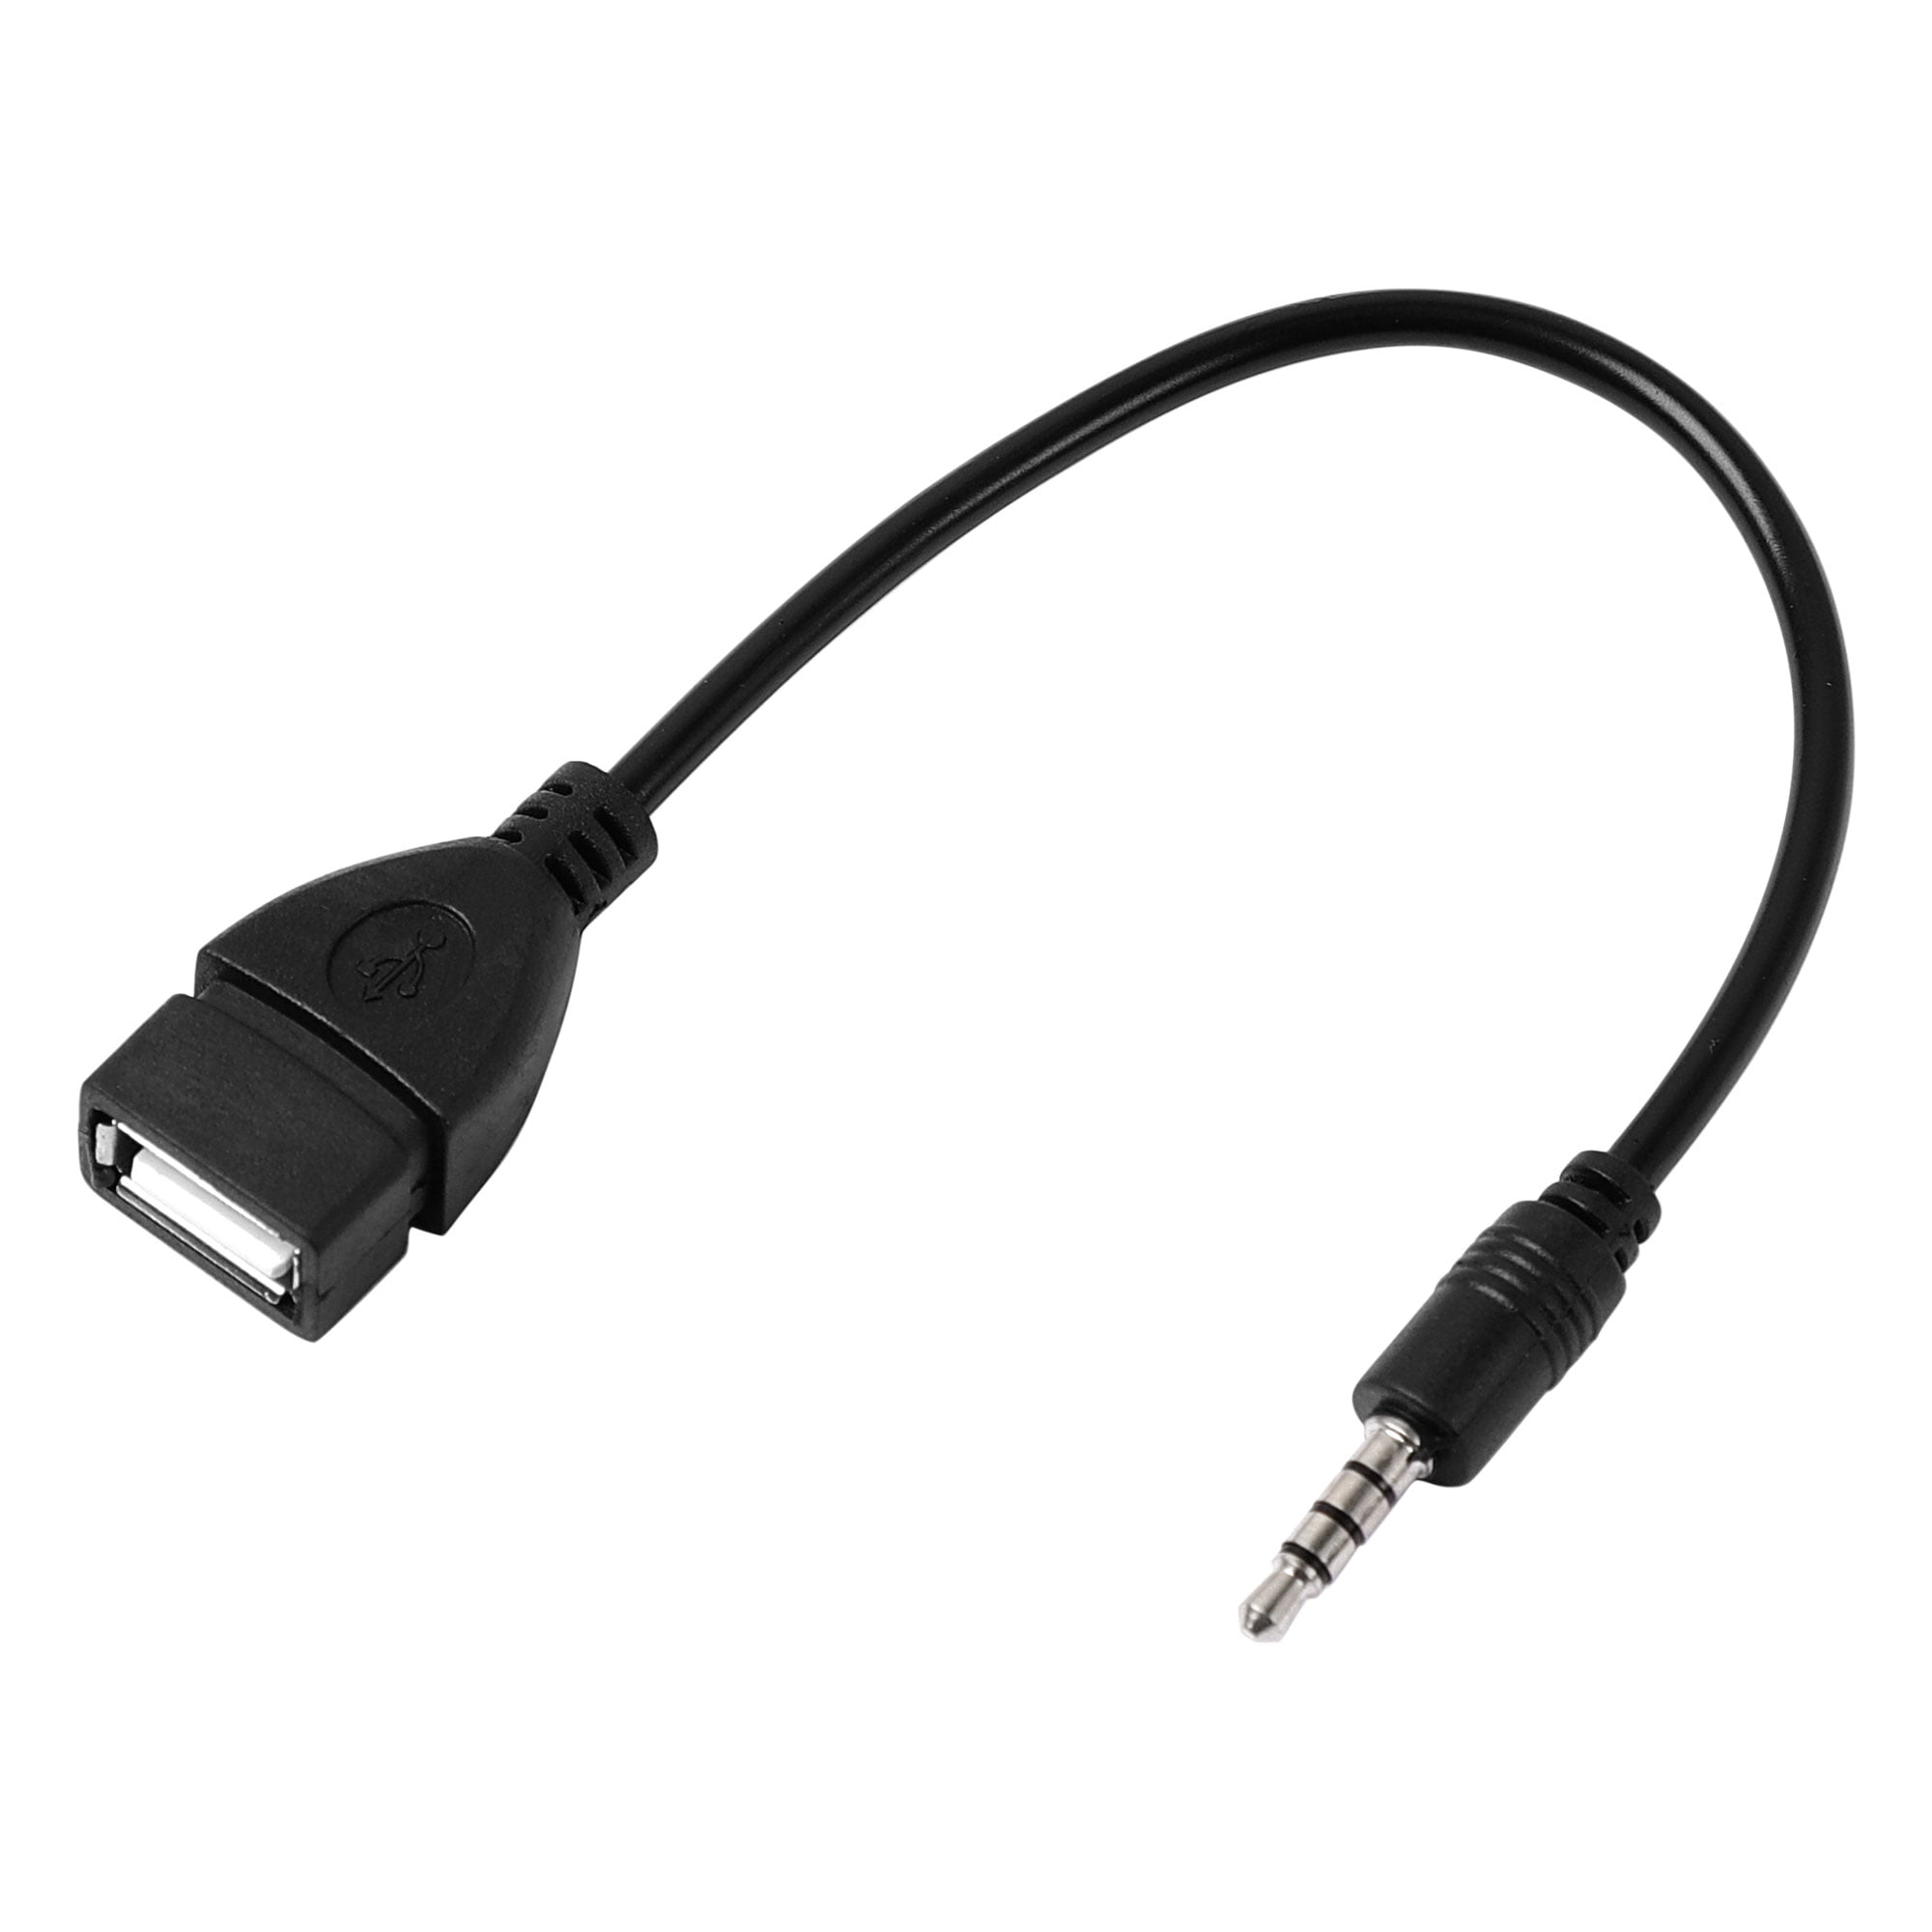 3.5mm Male AUX Audio Jack to USB 2.0 Female Converter Adapter Charge Cable